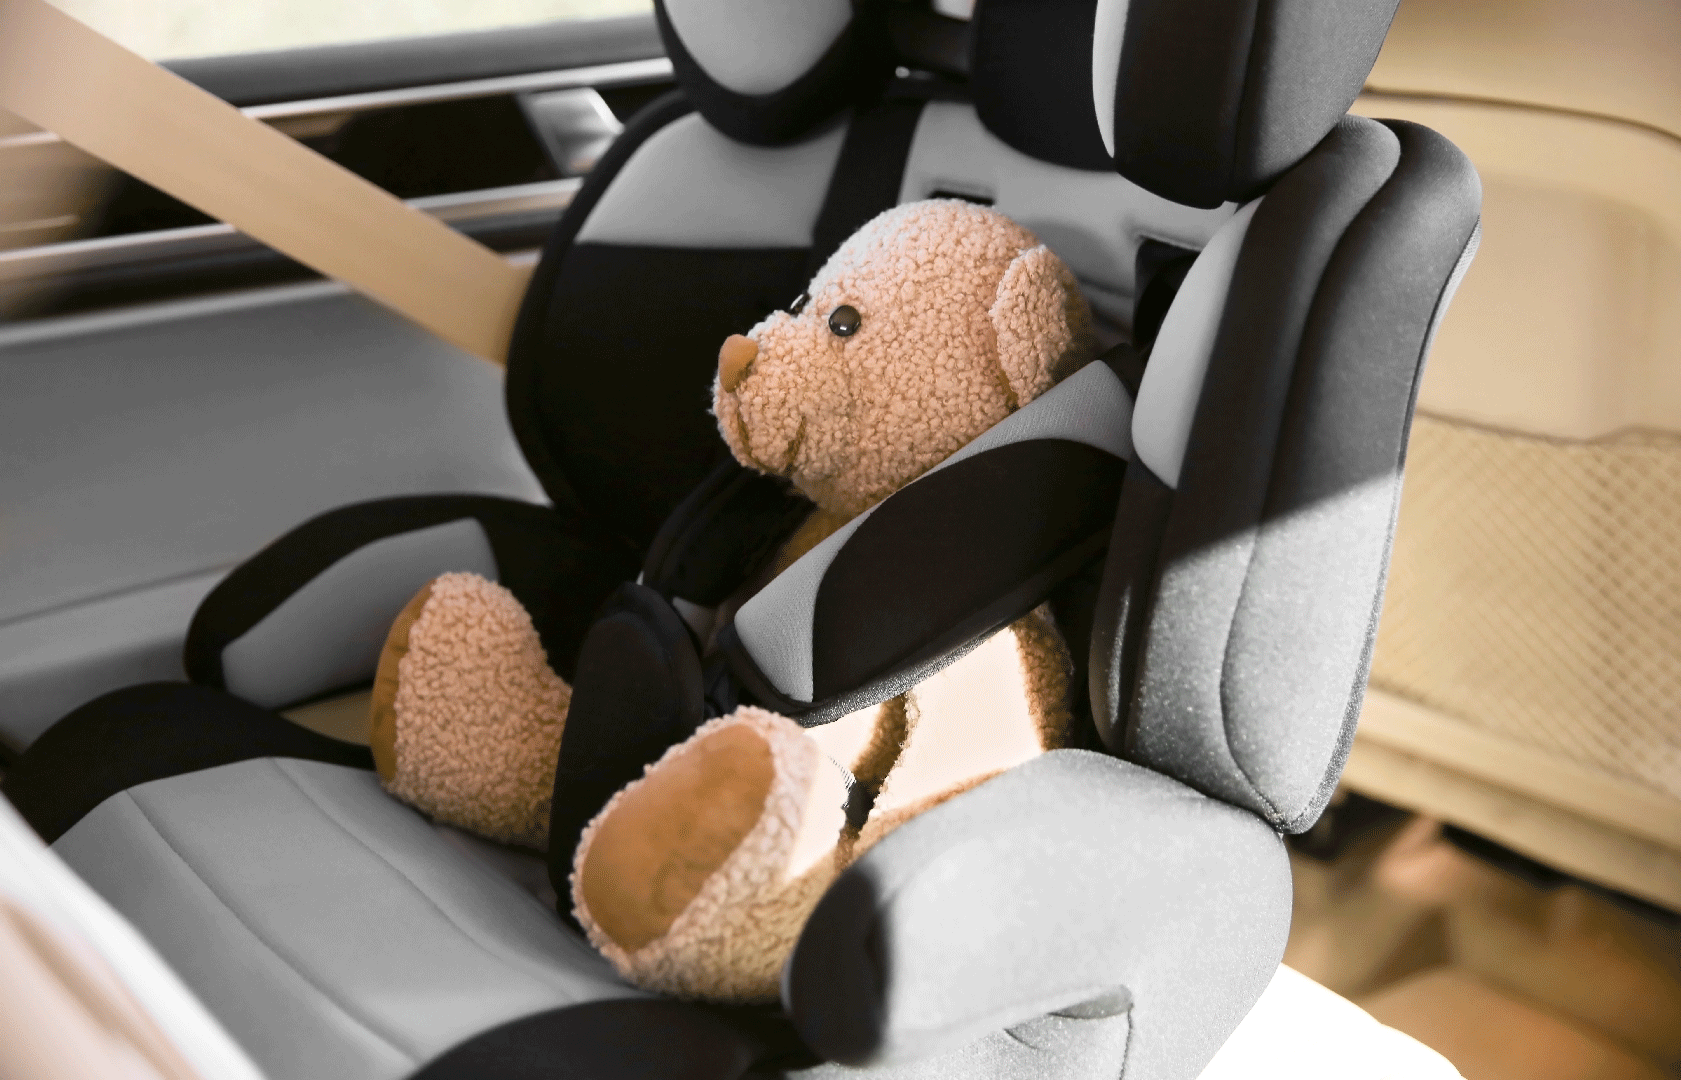 Teddy bear strapped into car seat which is in the car